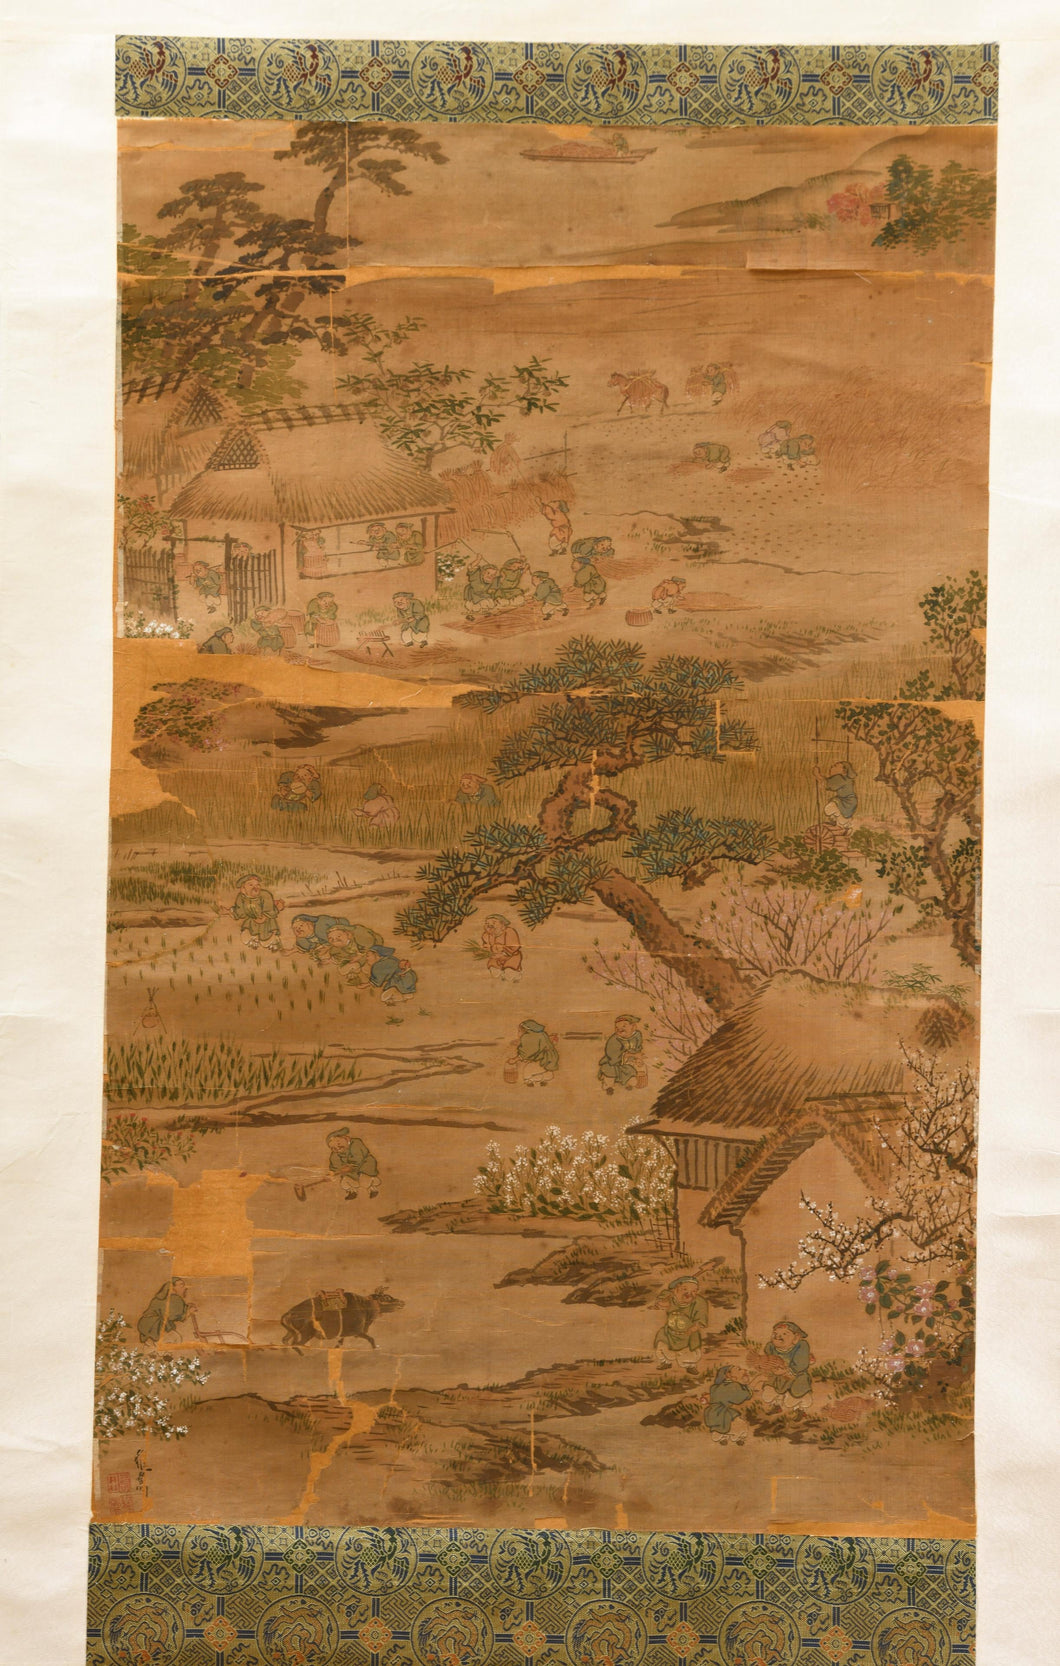 Japanese Painting of Rice Farmers, Circa Late 18th Century, Seal of 島田